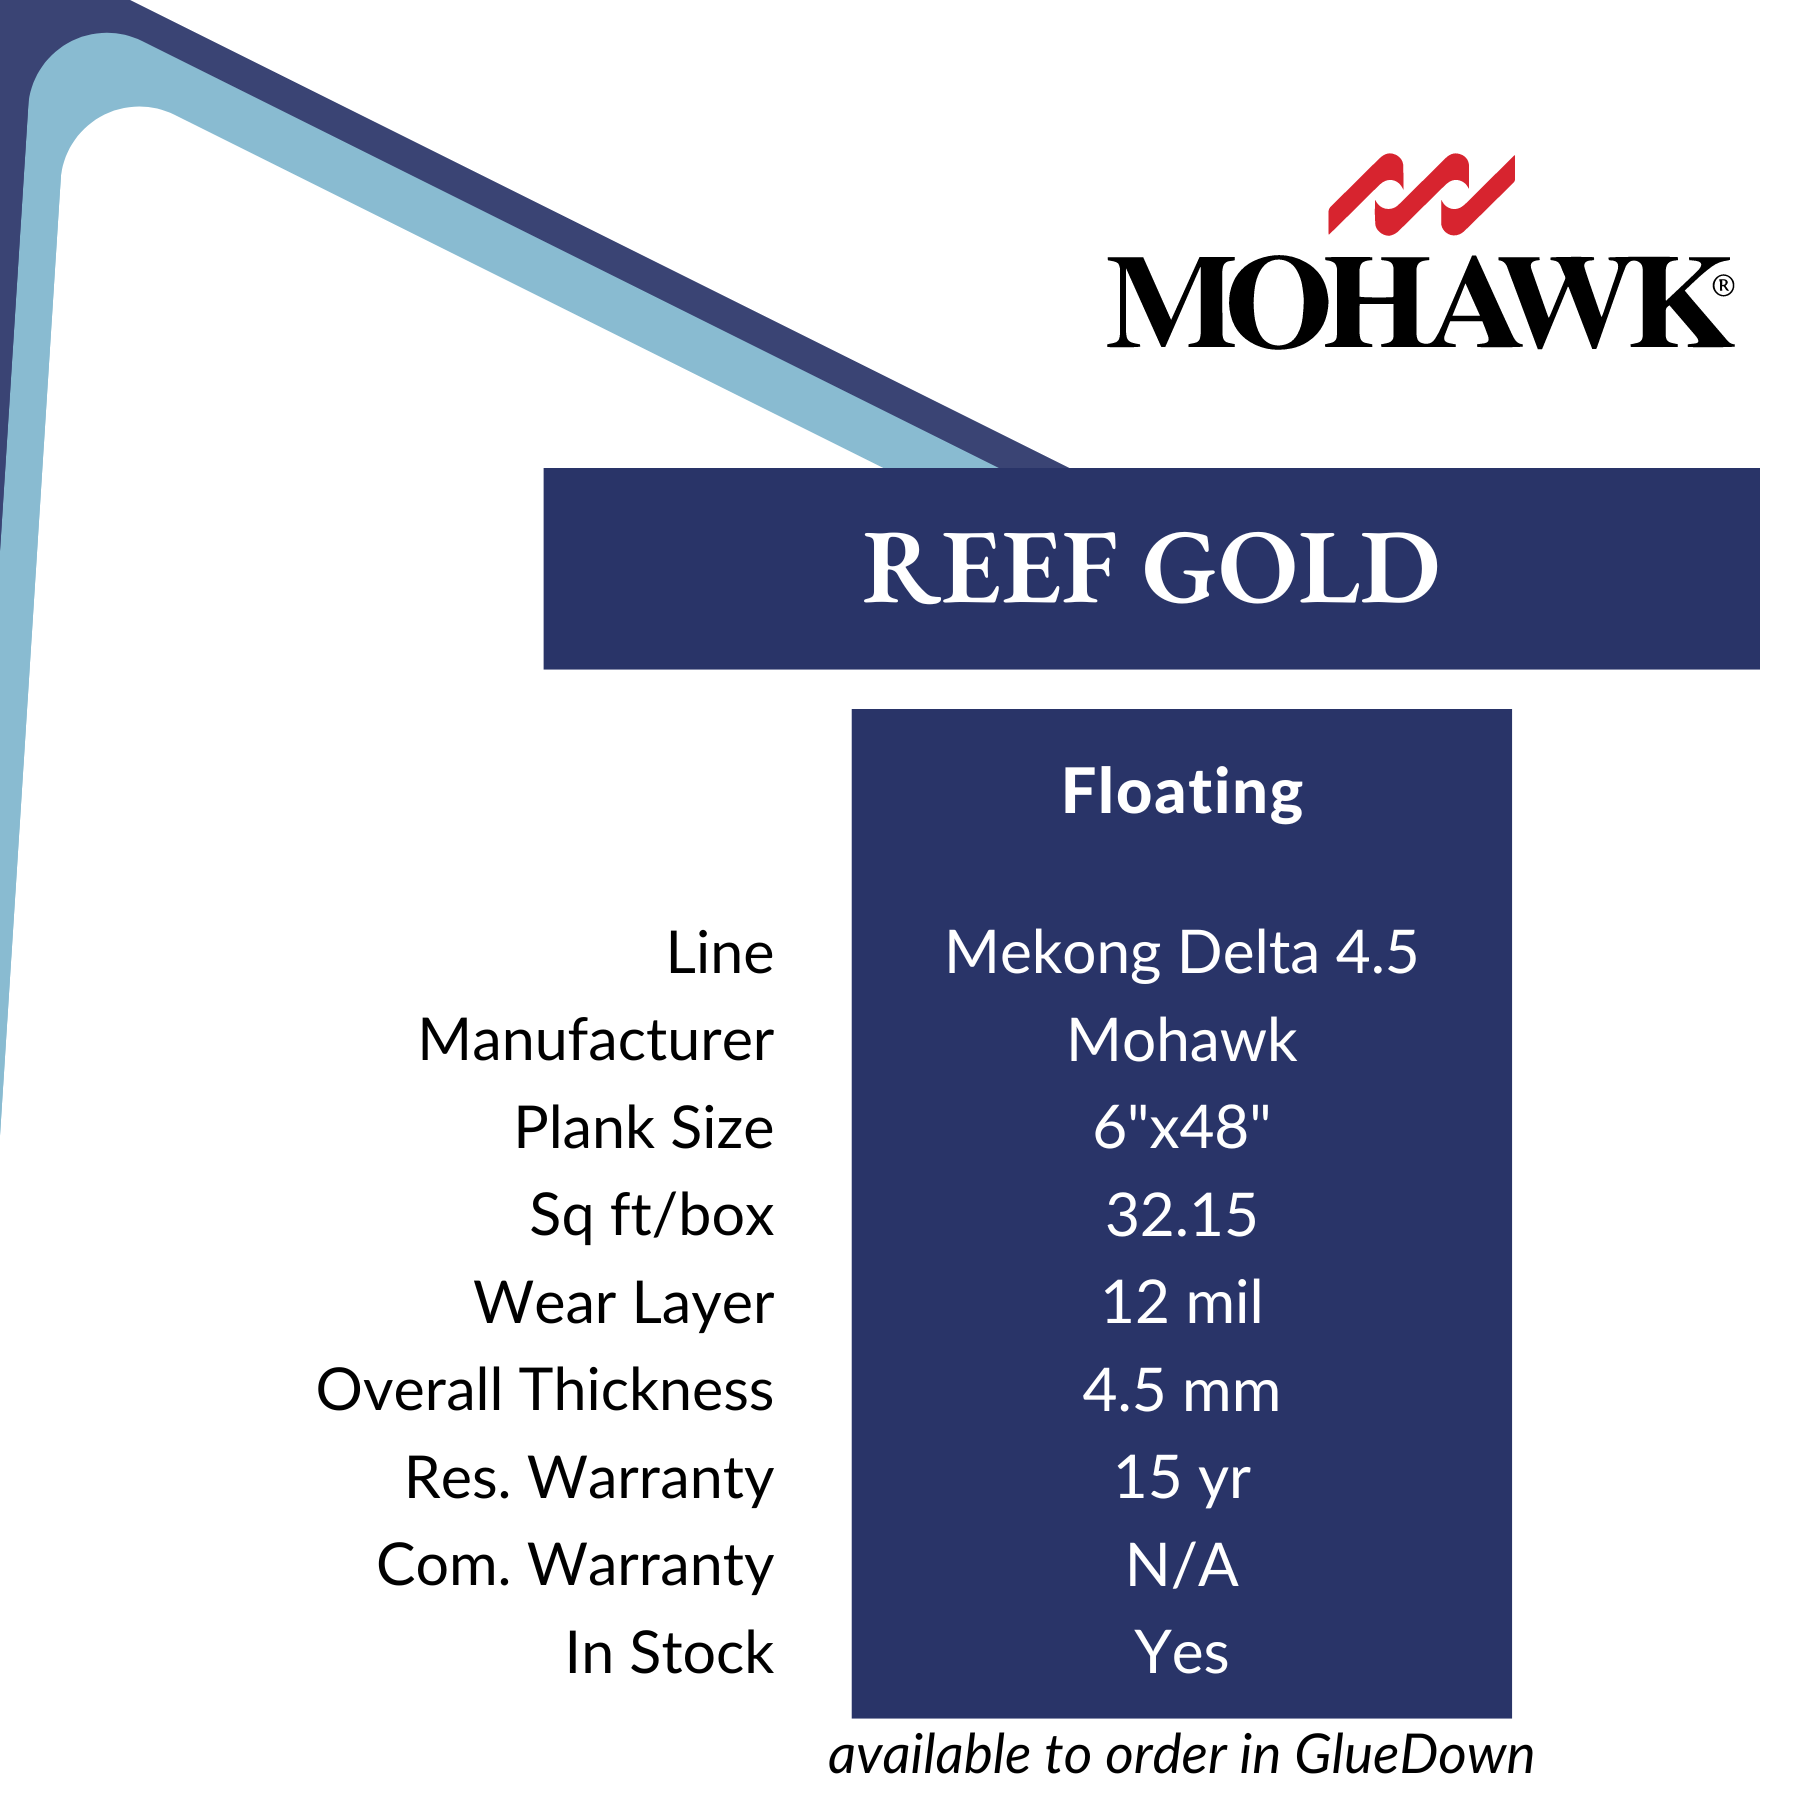 Reef Gold Luxury vinyl flooring by Mohawk sold at Calhoun's in Springfield, IL Specs